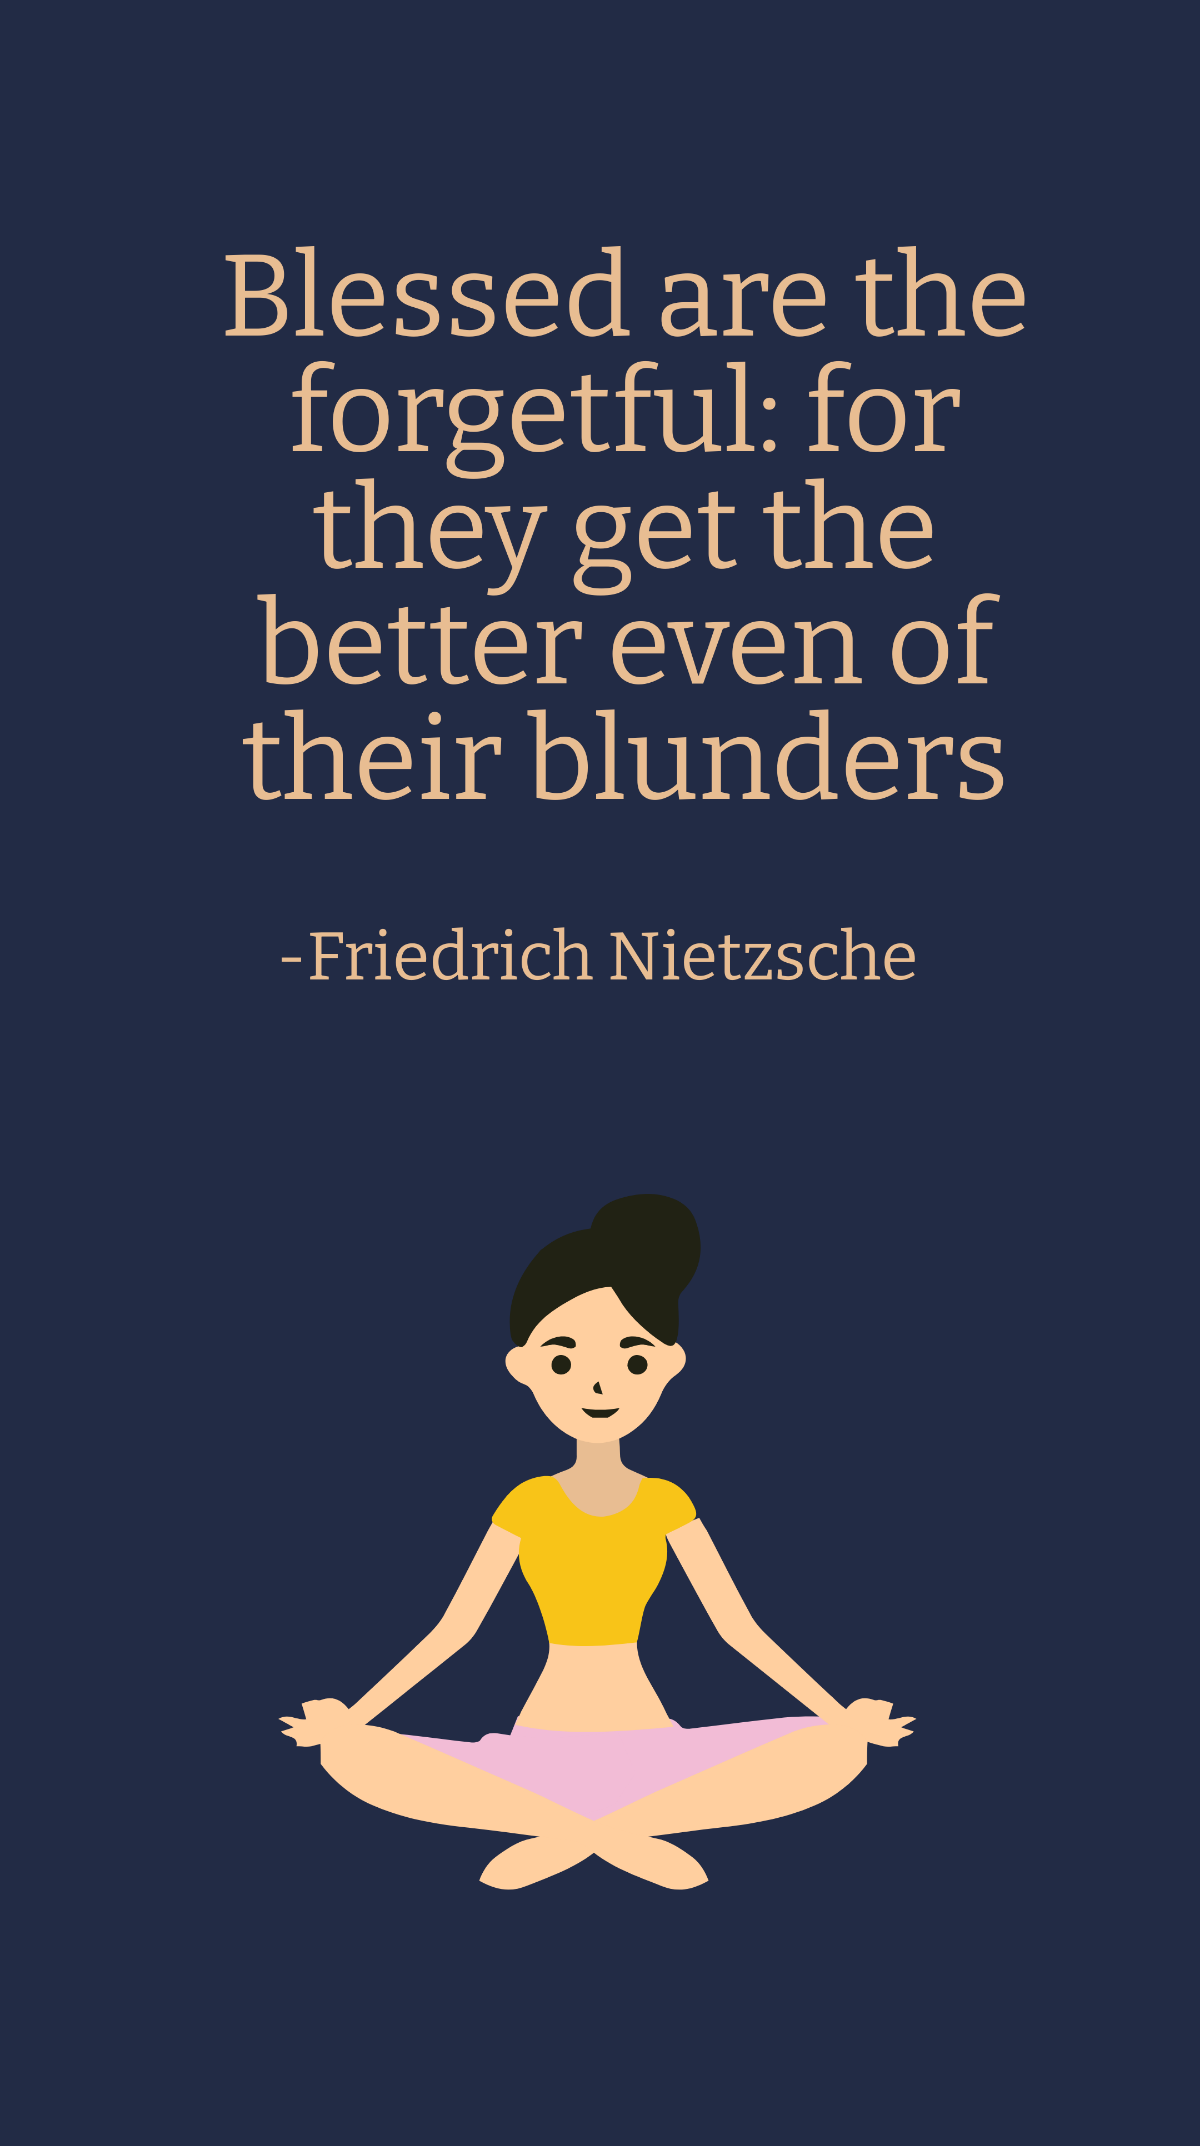 Friedrich Nietzsche - Blessed are the forgetful: for they get the better even of their blunders